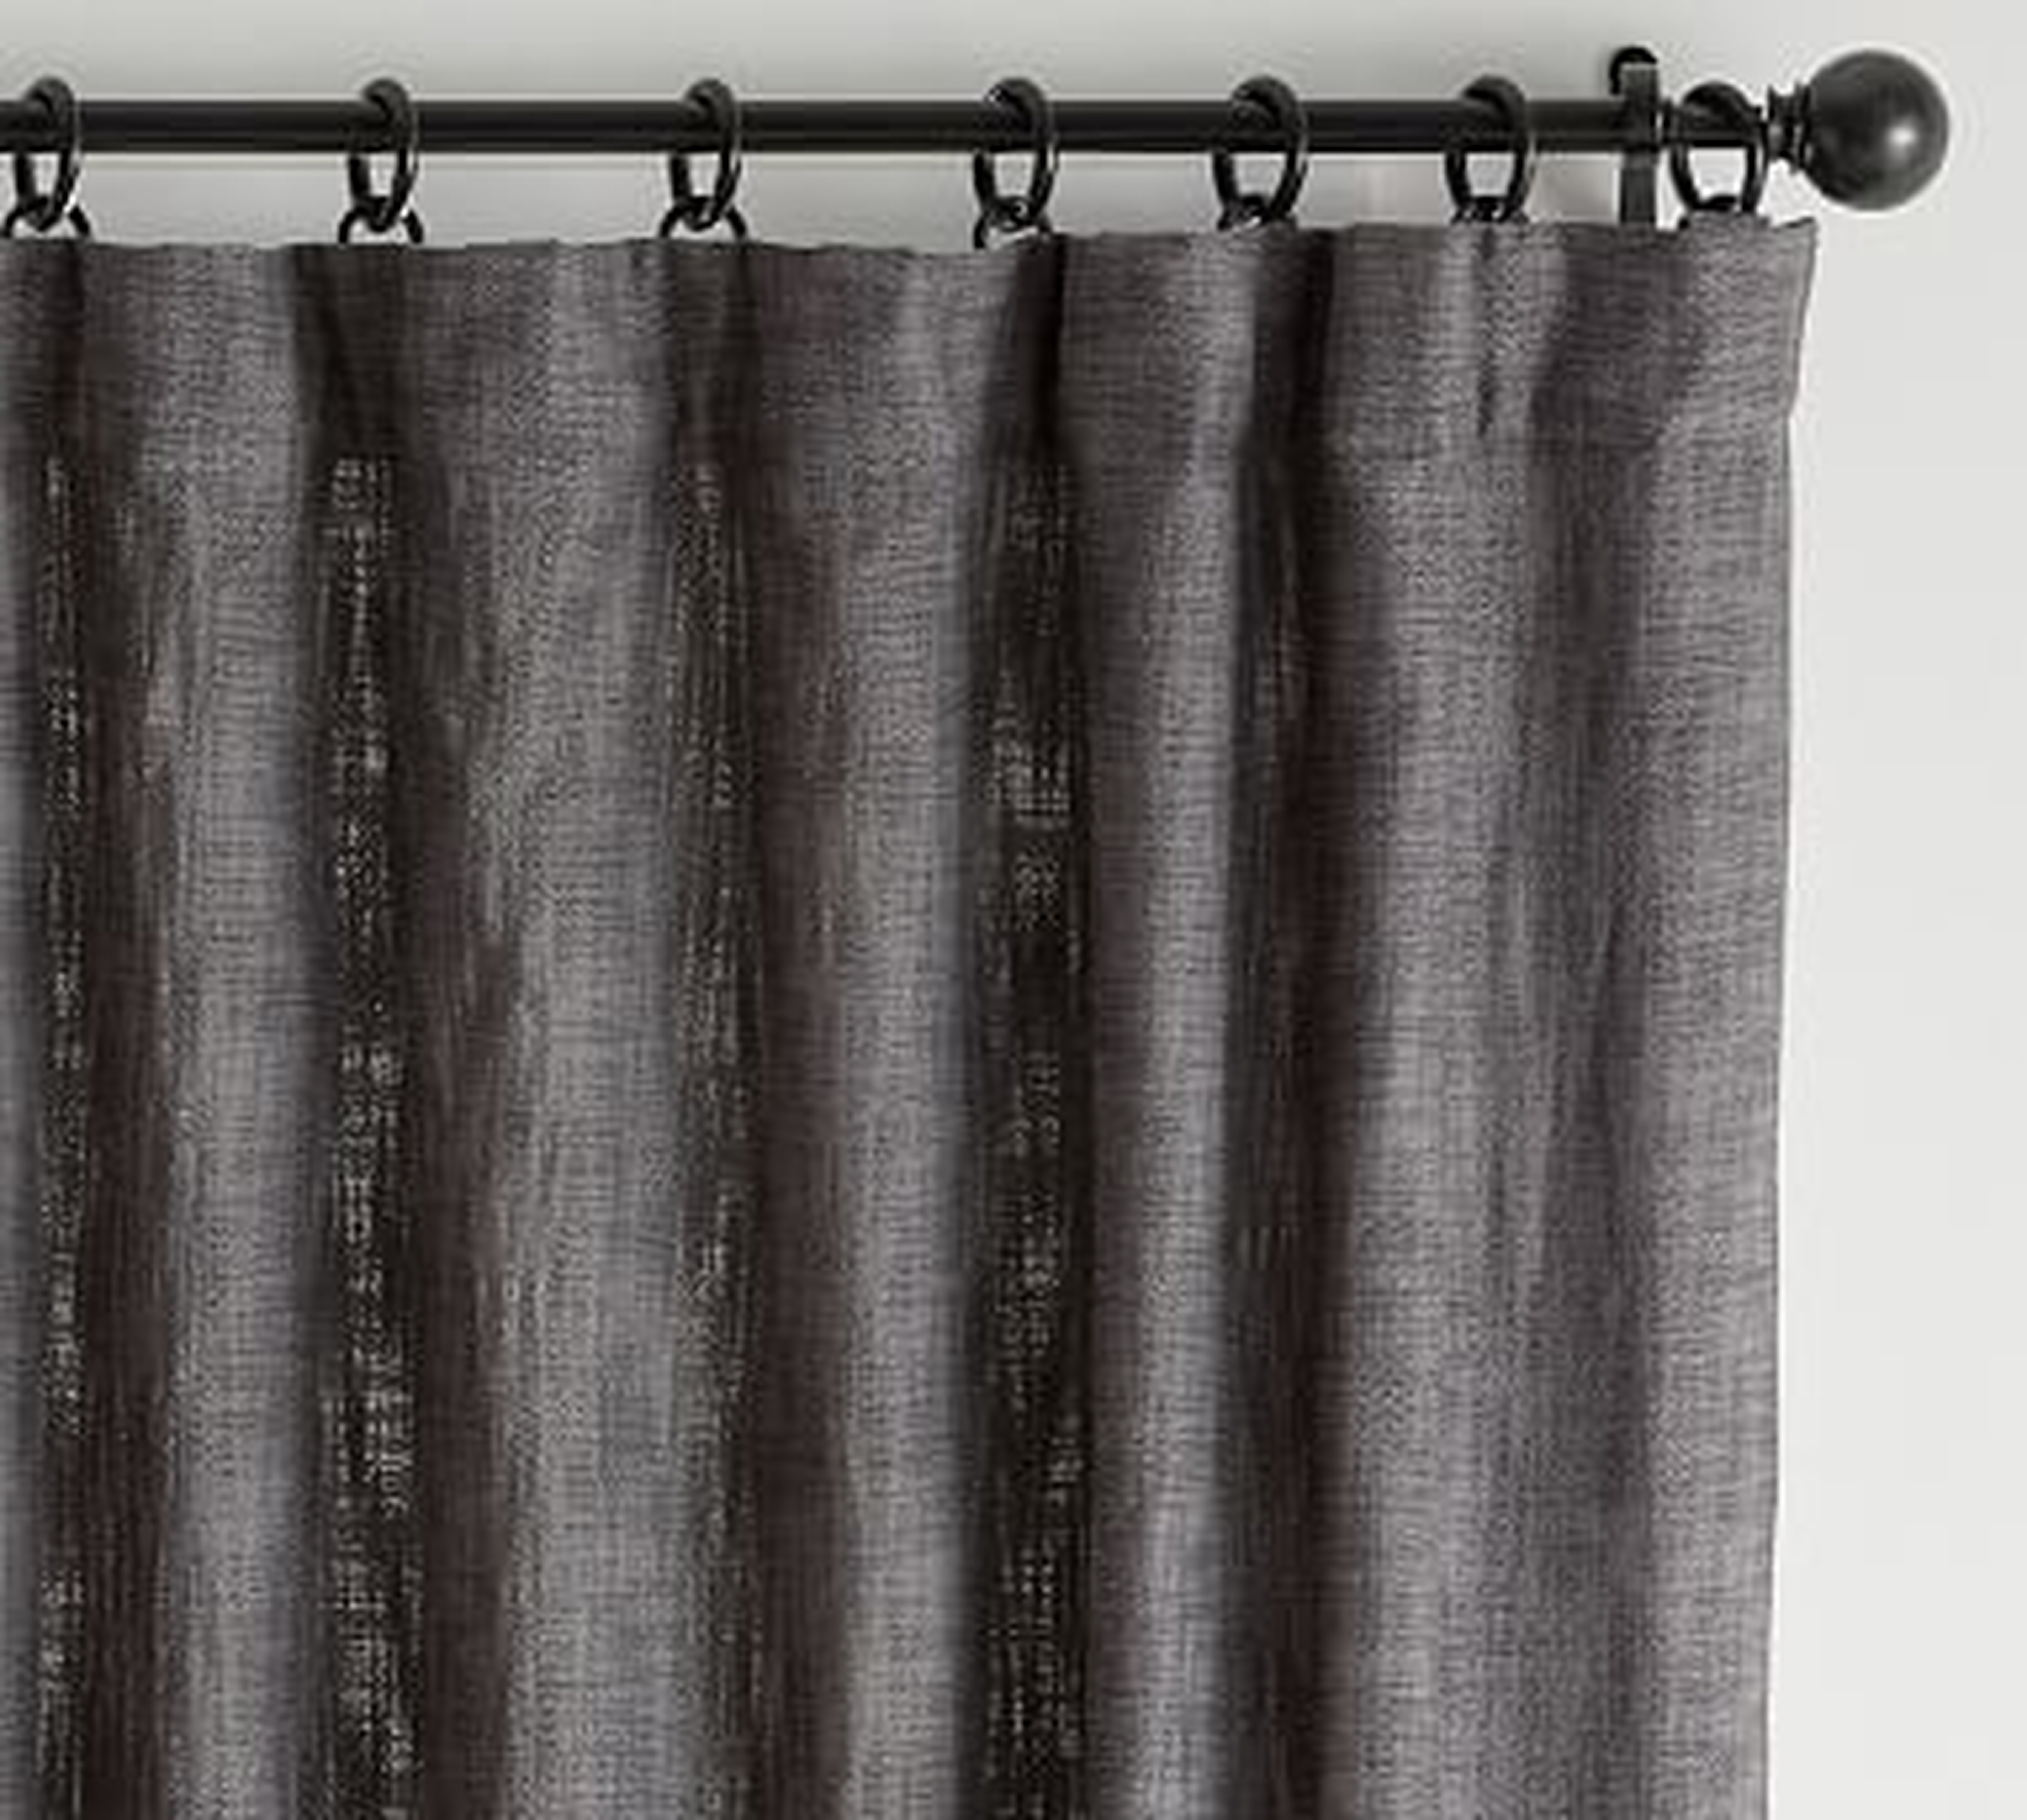 Seaton Textured Curtain, 50 x 108", Charcoal - Pottery Barn